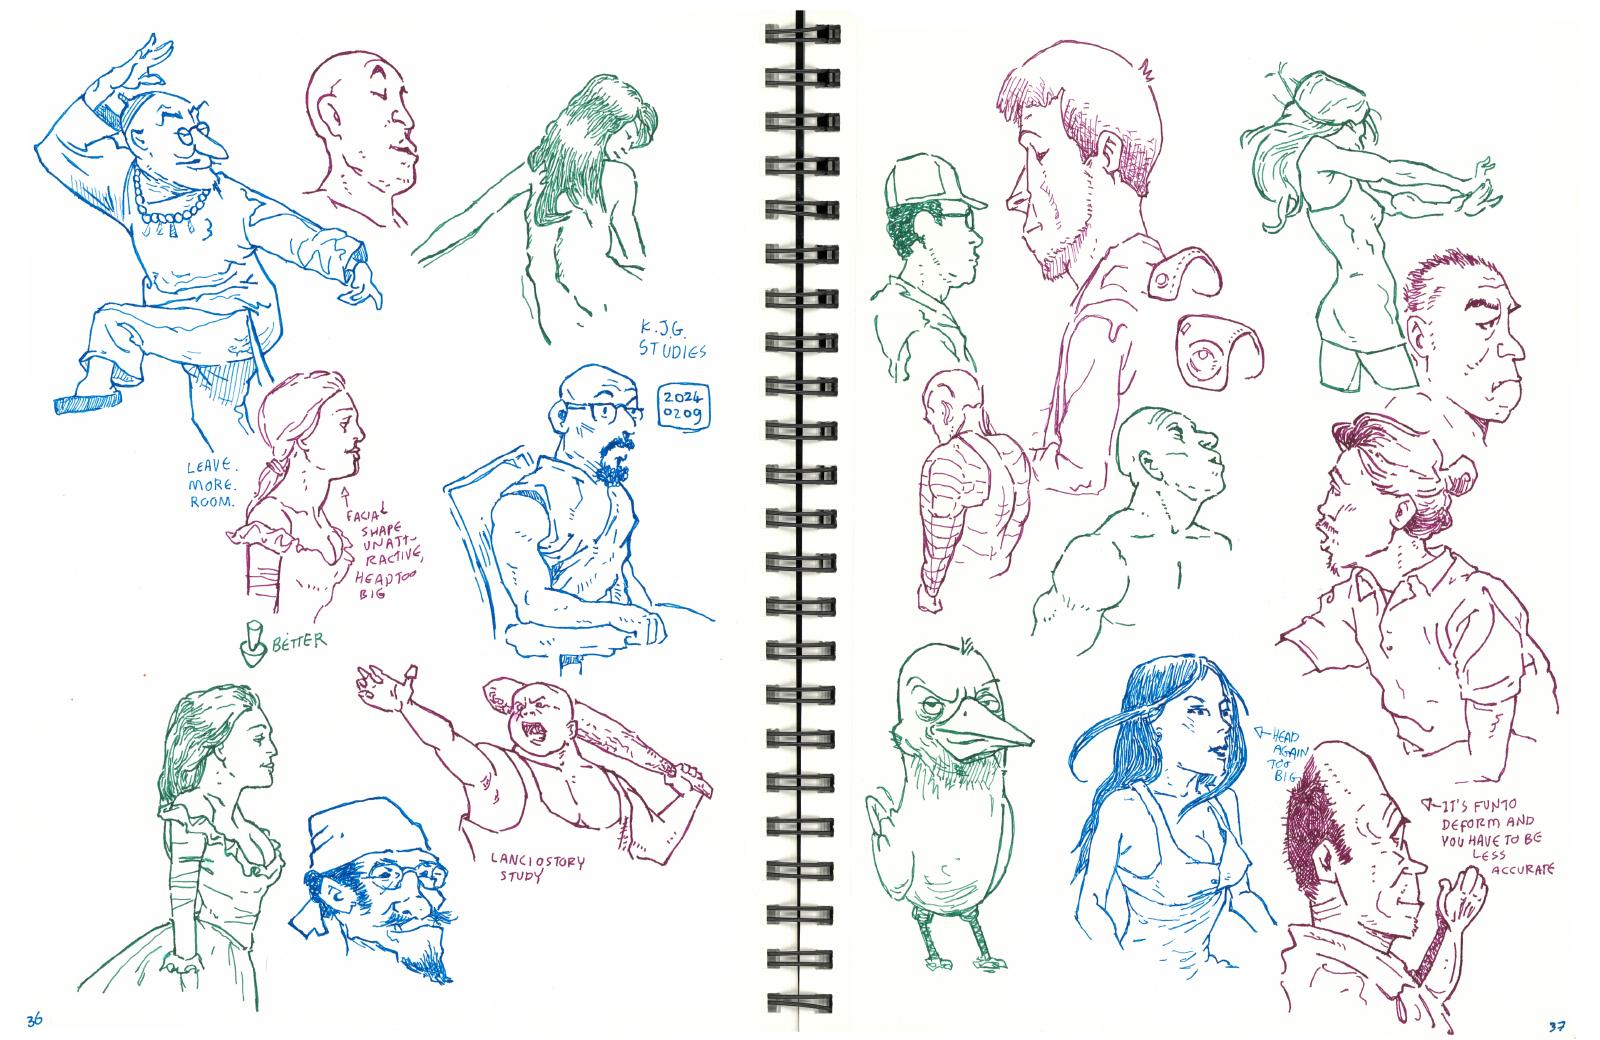 example of my sketchbook pages where you see me do my own drawing exercises